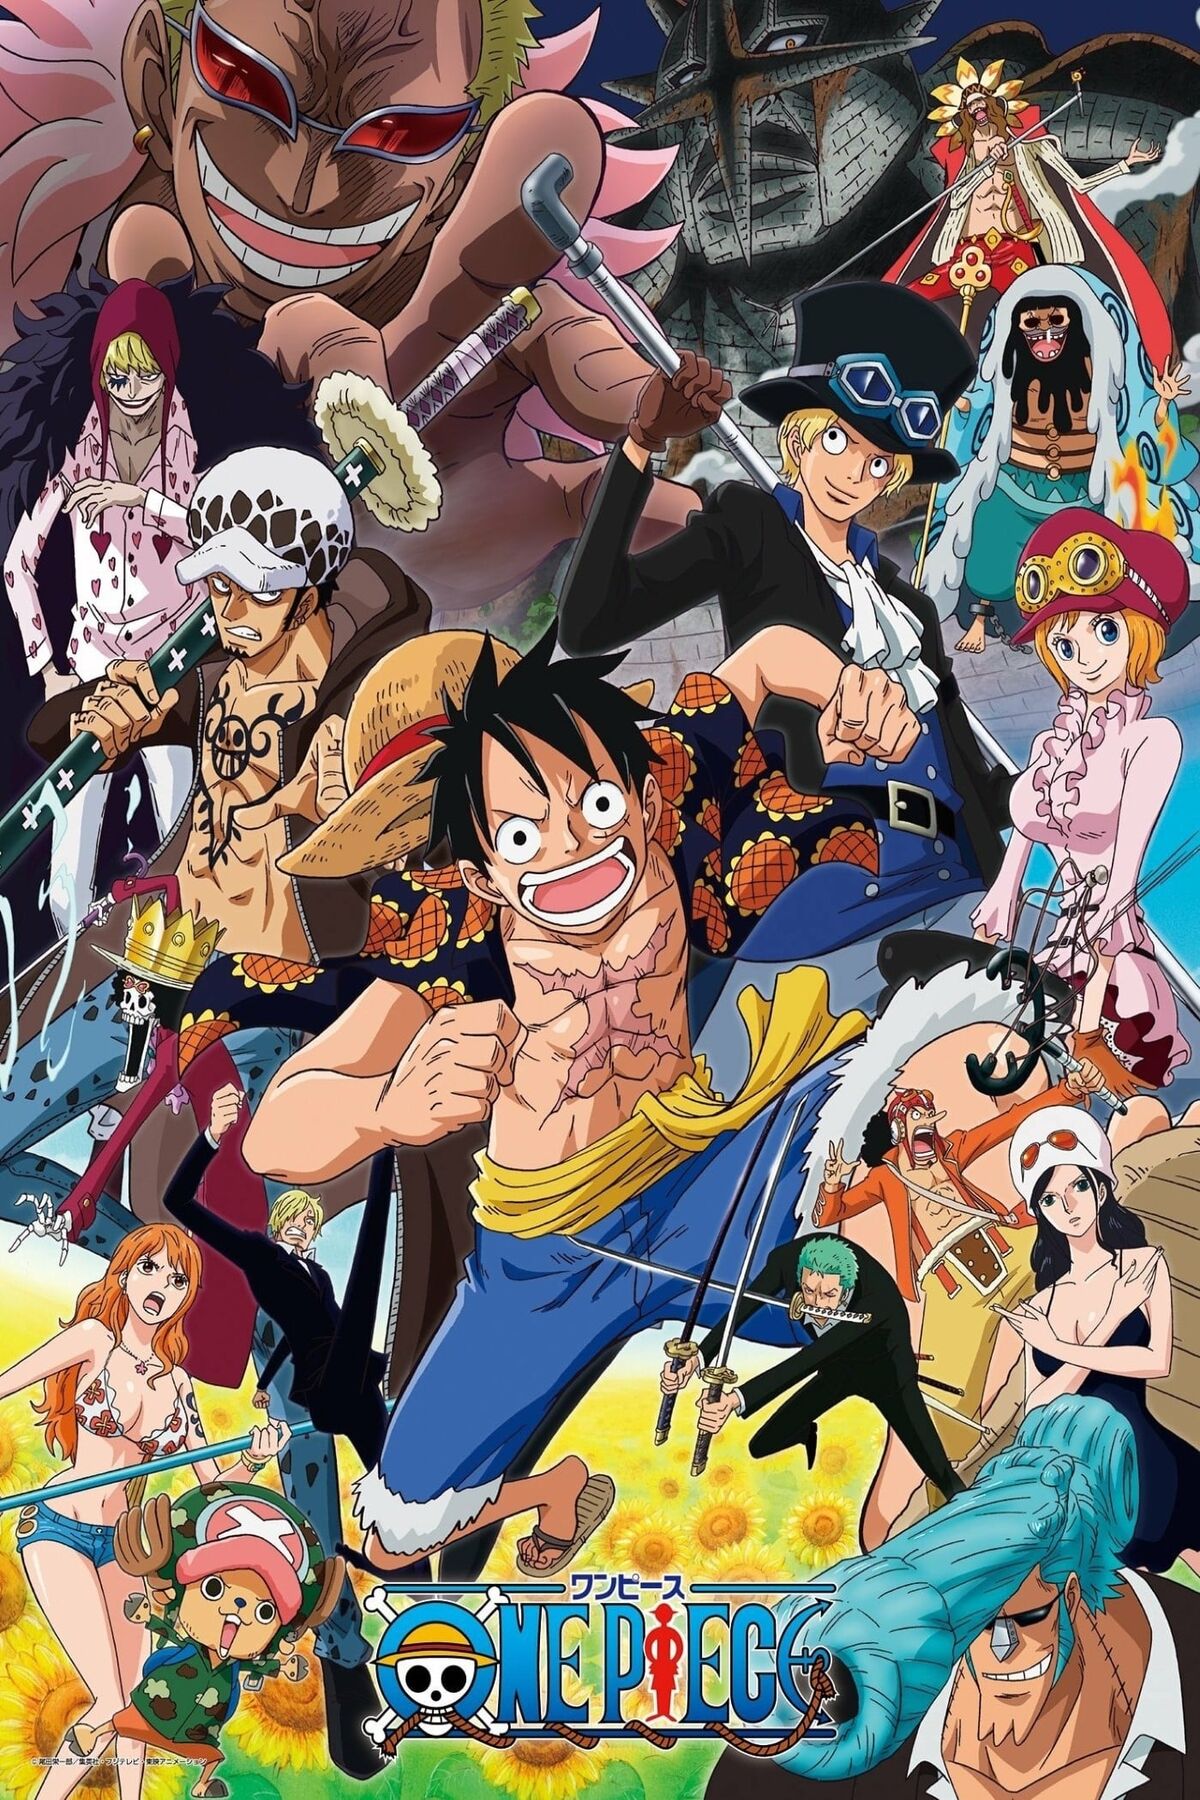 Anime Academy Team - One Piece Hindi Subbed!!!  [001-1026] [Ongoing] [Ep  1026 Added!!!] [FHD, HD, SD Added!!!] #Action #Adventure #Comedy #Drama  #Fantasy #Shounen #Super_Power Subber: King Shab, QC: King Shab Encoder